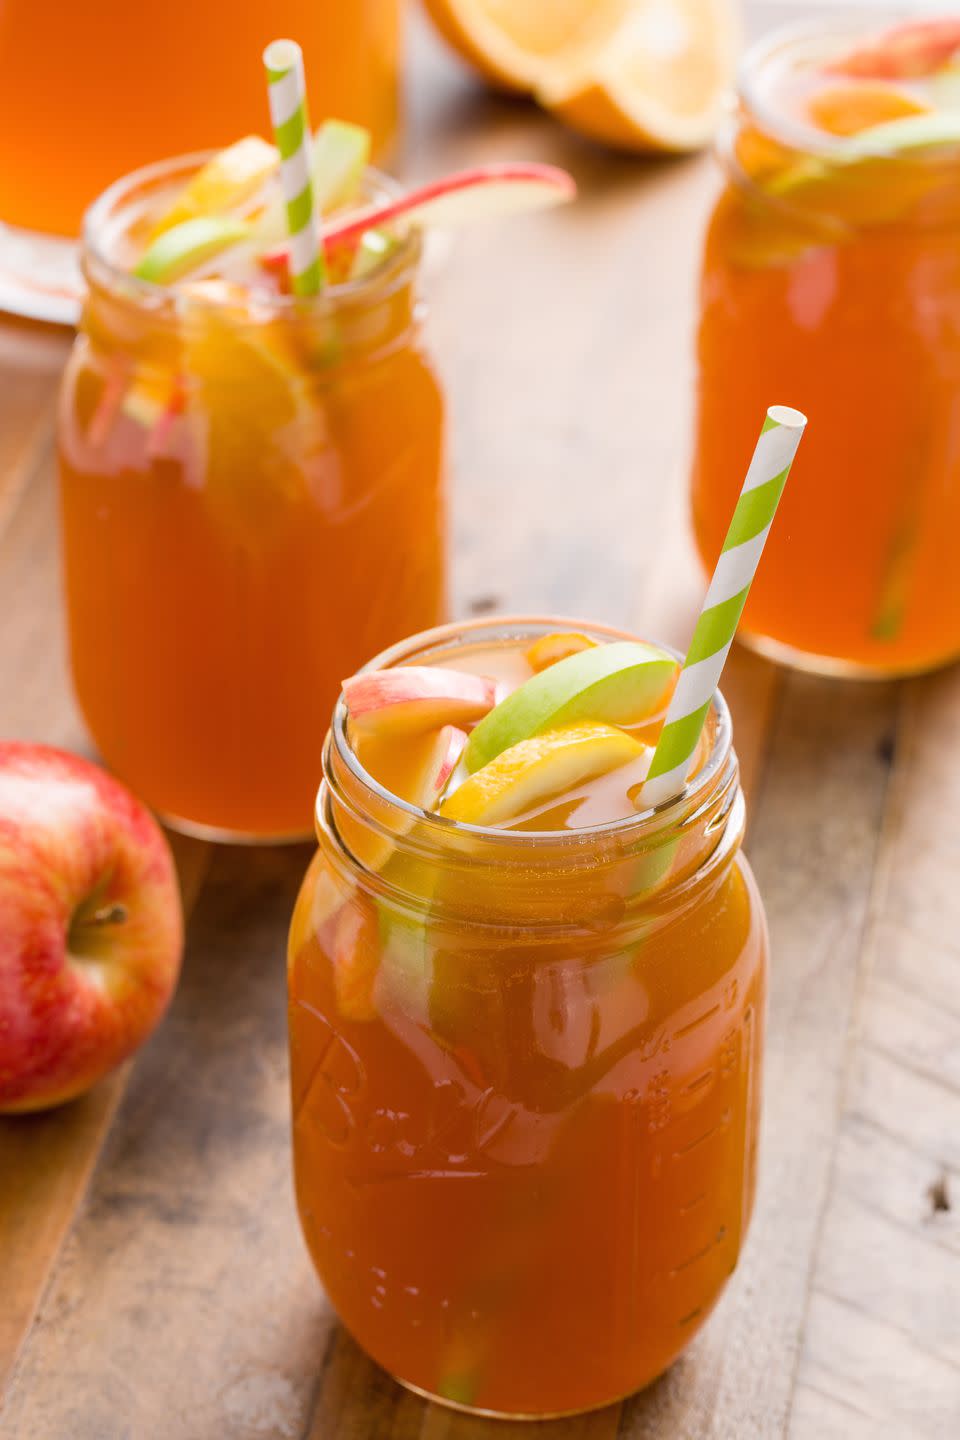 <p><a href="https://www.delish.com/cooking/g2824/sangria-recipe/" rel="nofollow noopener" target="_blank" data-ylk="slk:Sangria" class="link ">Sangria</a> might make you think of warm summer nights and tropical fruits, but this apple-based cocktail will have you ready for fall. Here, we went for a <a href="https://www.delish.com/cooking/recipe-ideas/a56371/pumpkin-pie-sangria-recipe/" rel="nofollow noopener" target="_blank" data-ylk="slk:white wine sangria" class="link ">white wine sangria</a>, rounded out with spicy ginger beer and sweet apple cider. </p><p>Get the <strong><a href="https://www.delish.com/cooking/recipe-ideas/recipes/a43666/apple-cider-sangria-recipe/" rel="nofollow noopener" target="_blank" data-ylk="slk:Apple Cider Sangria recipe" class="link ">Apple Cider Sangria recipe</a>. </strong> </p>